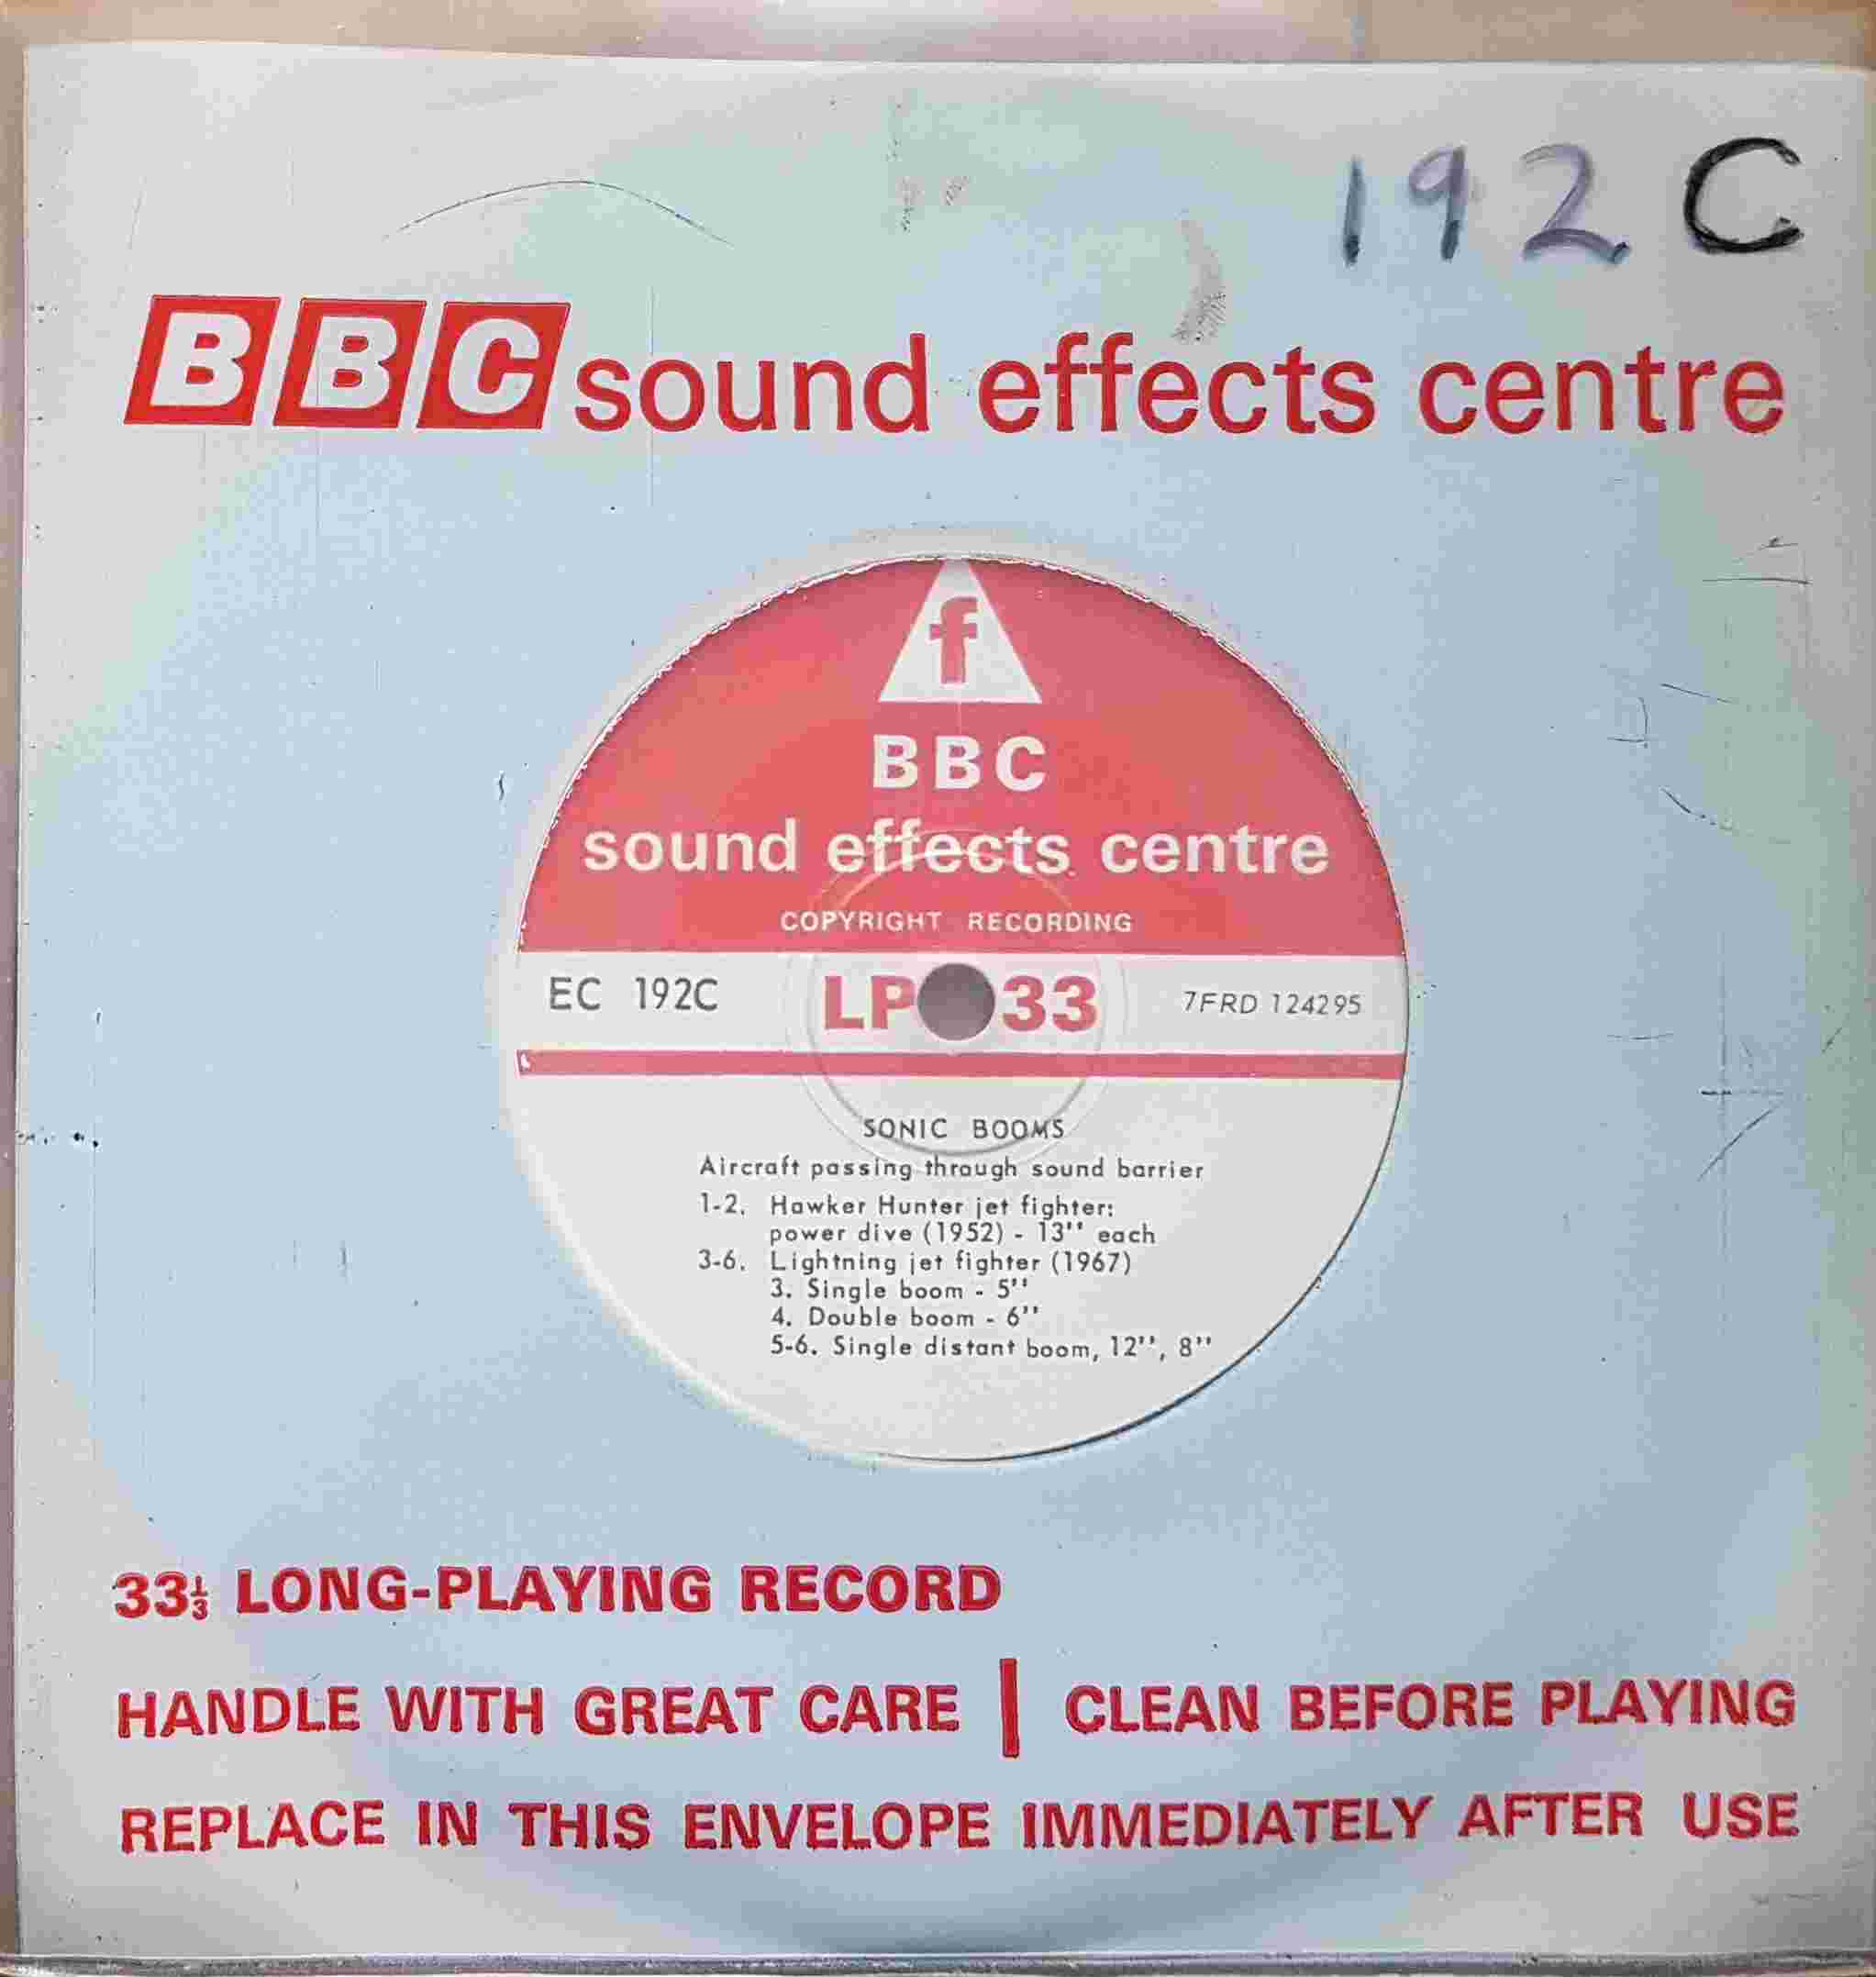 Picture of EC 192C Sonic Booms / U. S. space ship landing by artist Not registered from the BBC singles - Records and Tapes library